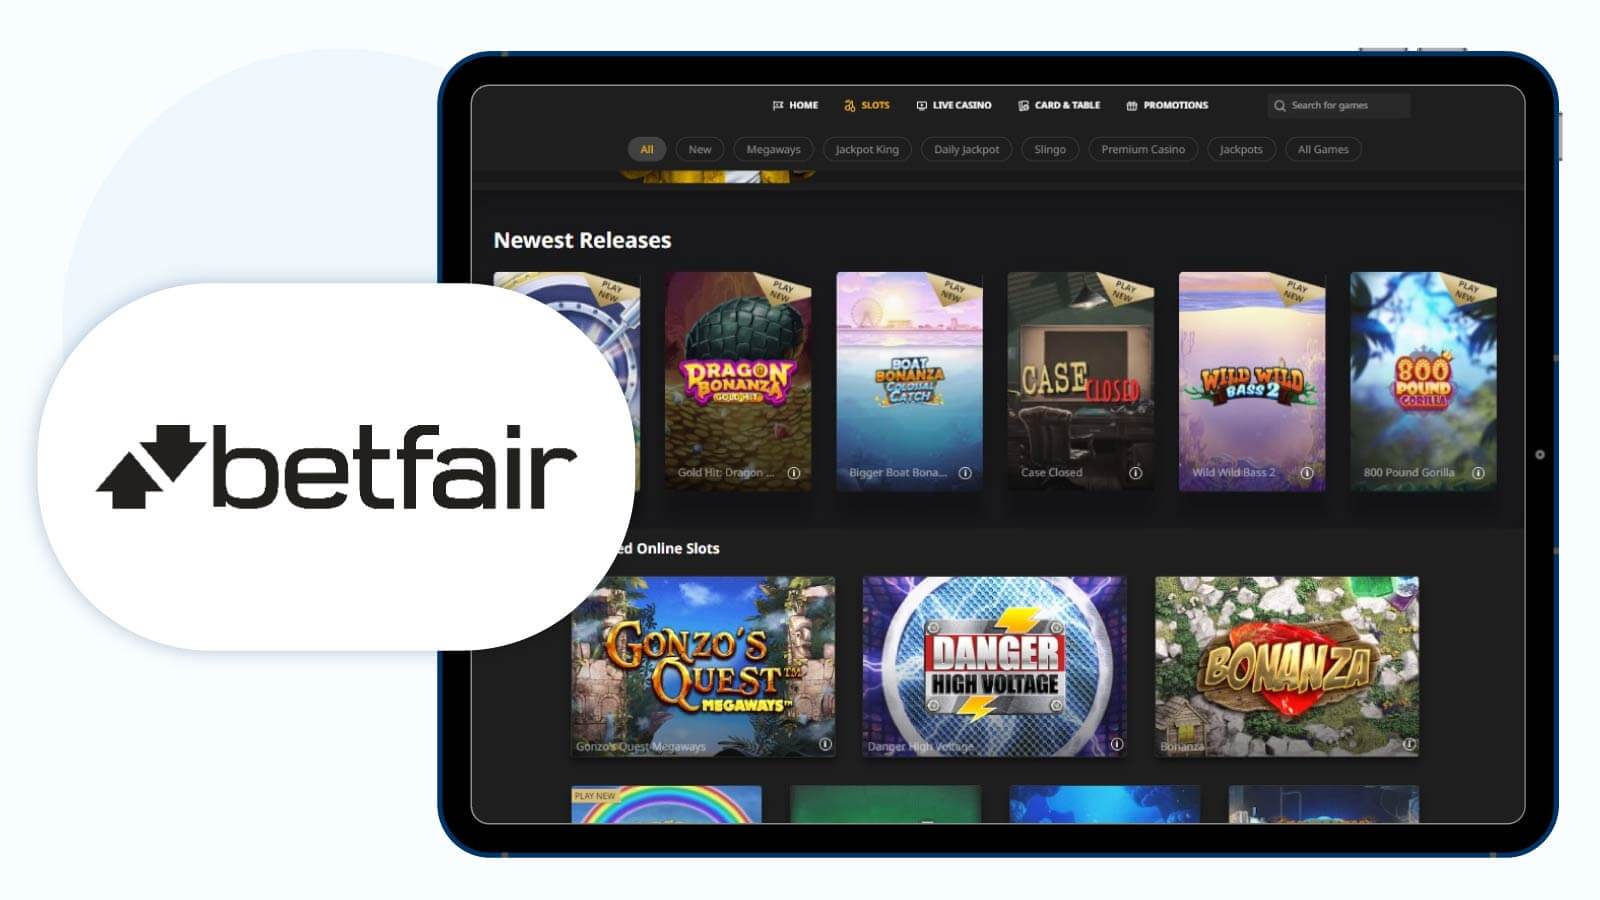 Betfair-verify-SMS-get-no-deposit-free-spins-on-Daily-Jackpots